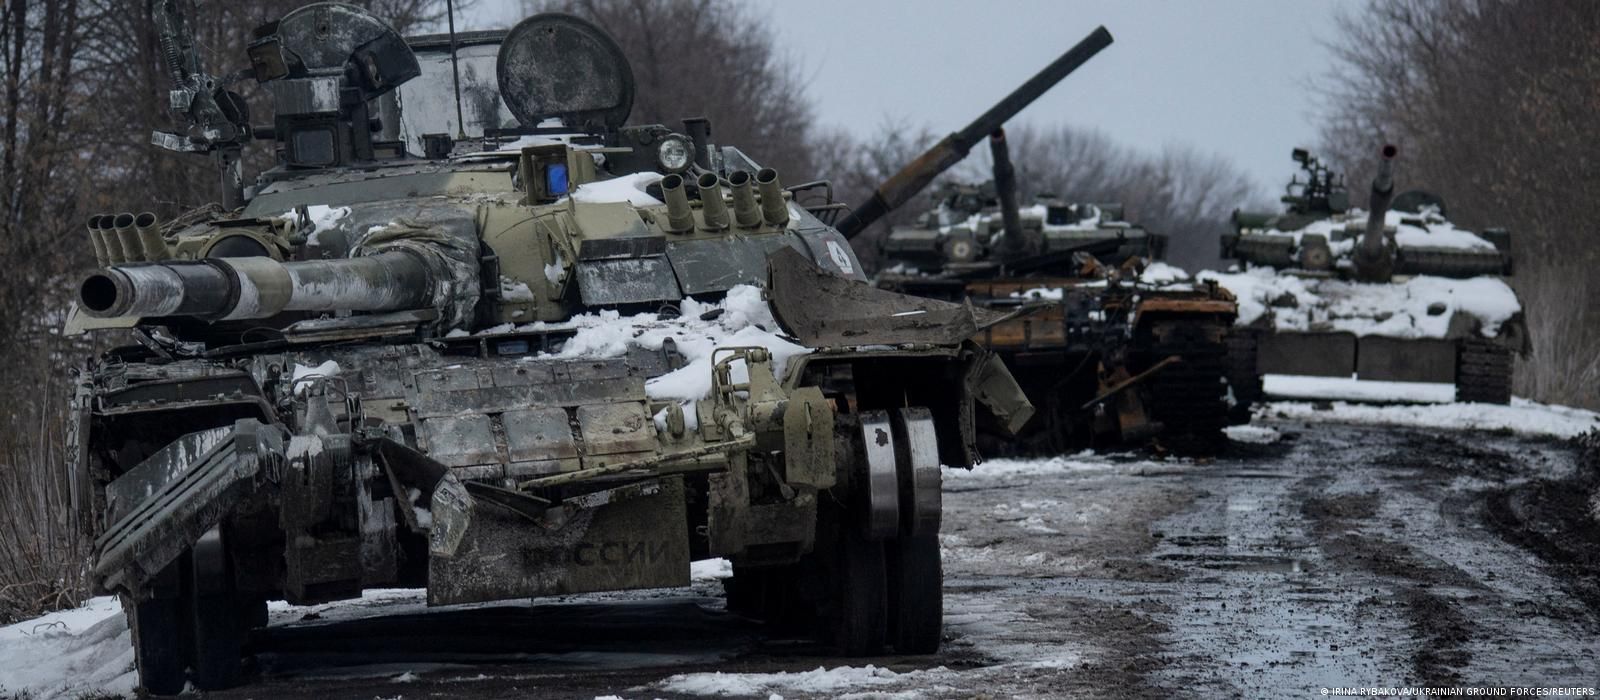 russia’s Leadership Understands that Plan to Quickly Seize Ukraine Is Impossible to Realize